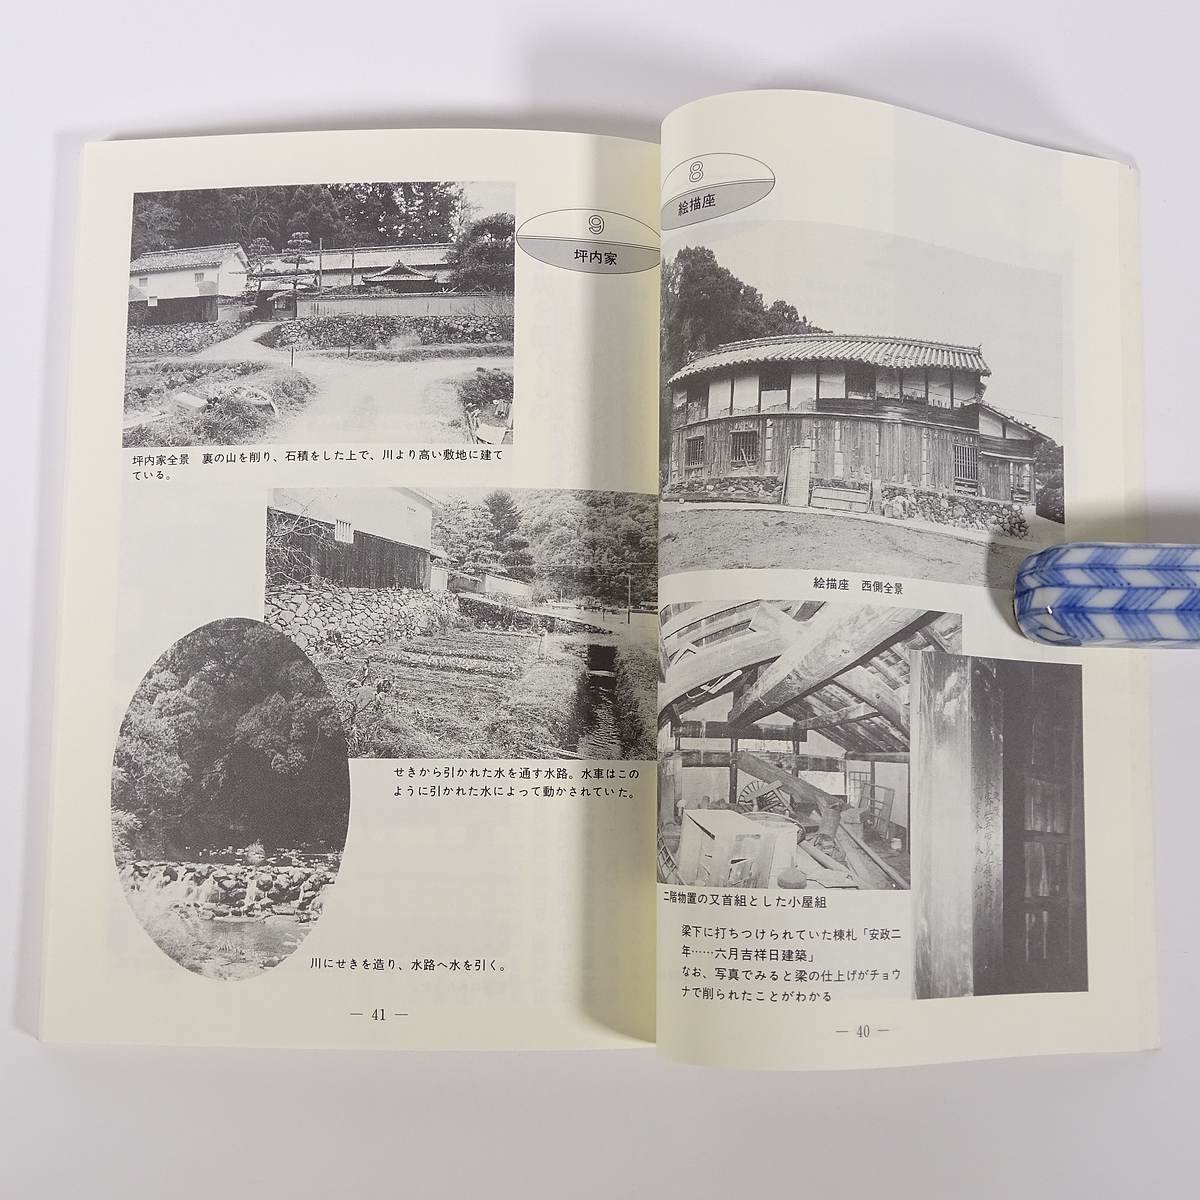  culture Ehime no. 21 number ( increase .) Ehime prefecture culture .. foundation 1989 small booklet . earth book@ special collection * prize theory writing go in . work Tobe .. history ..... house ..... thing another 